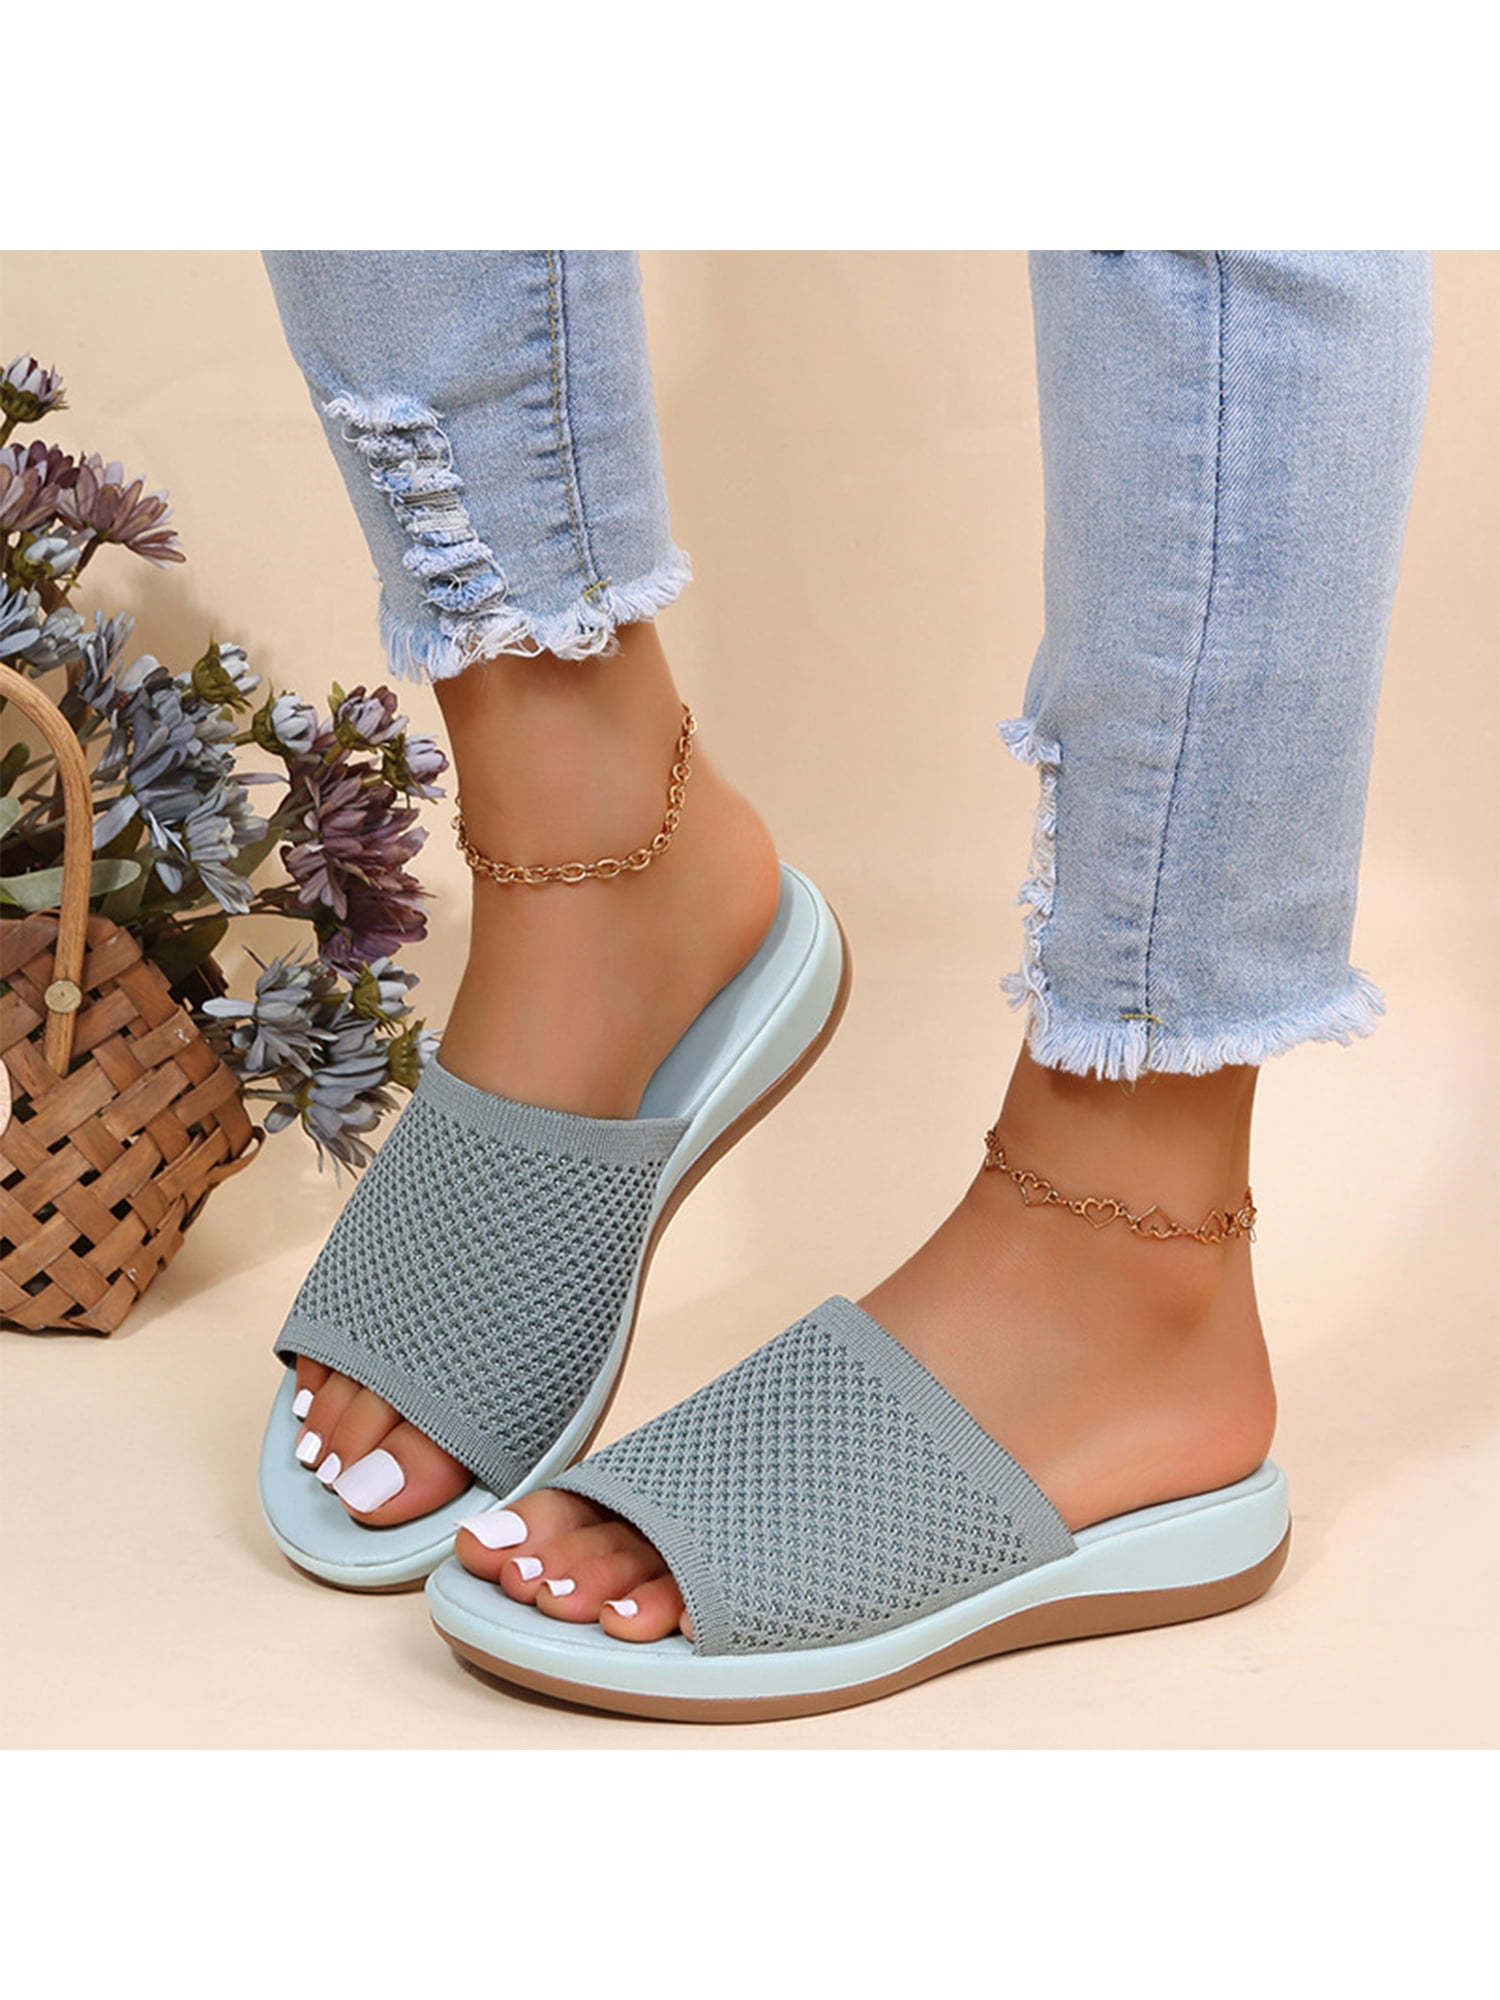 2019 New Womens Soft Wedges Shoes Casual Slippers Solid Thick Bottom Female Fish Mouth Summer Beach Flats Sandals